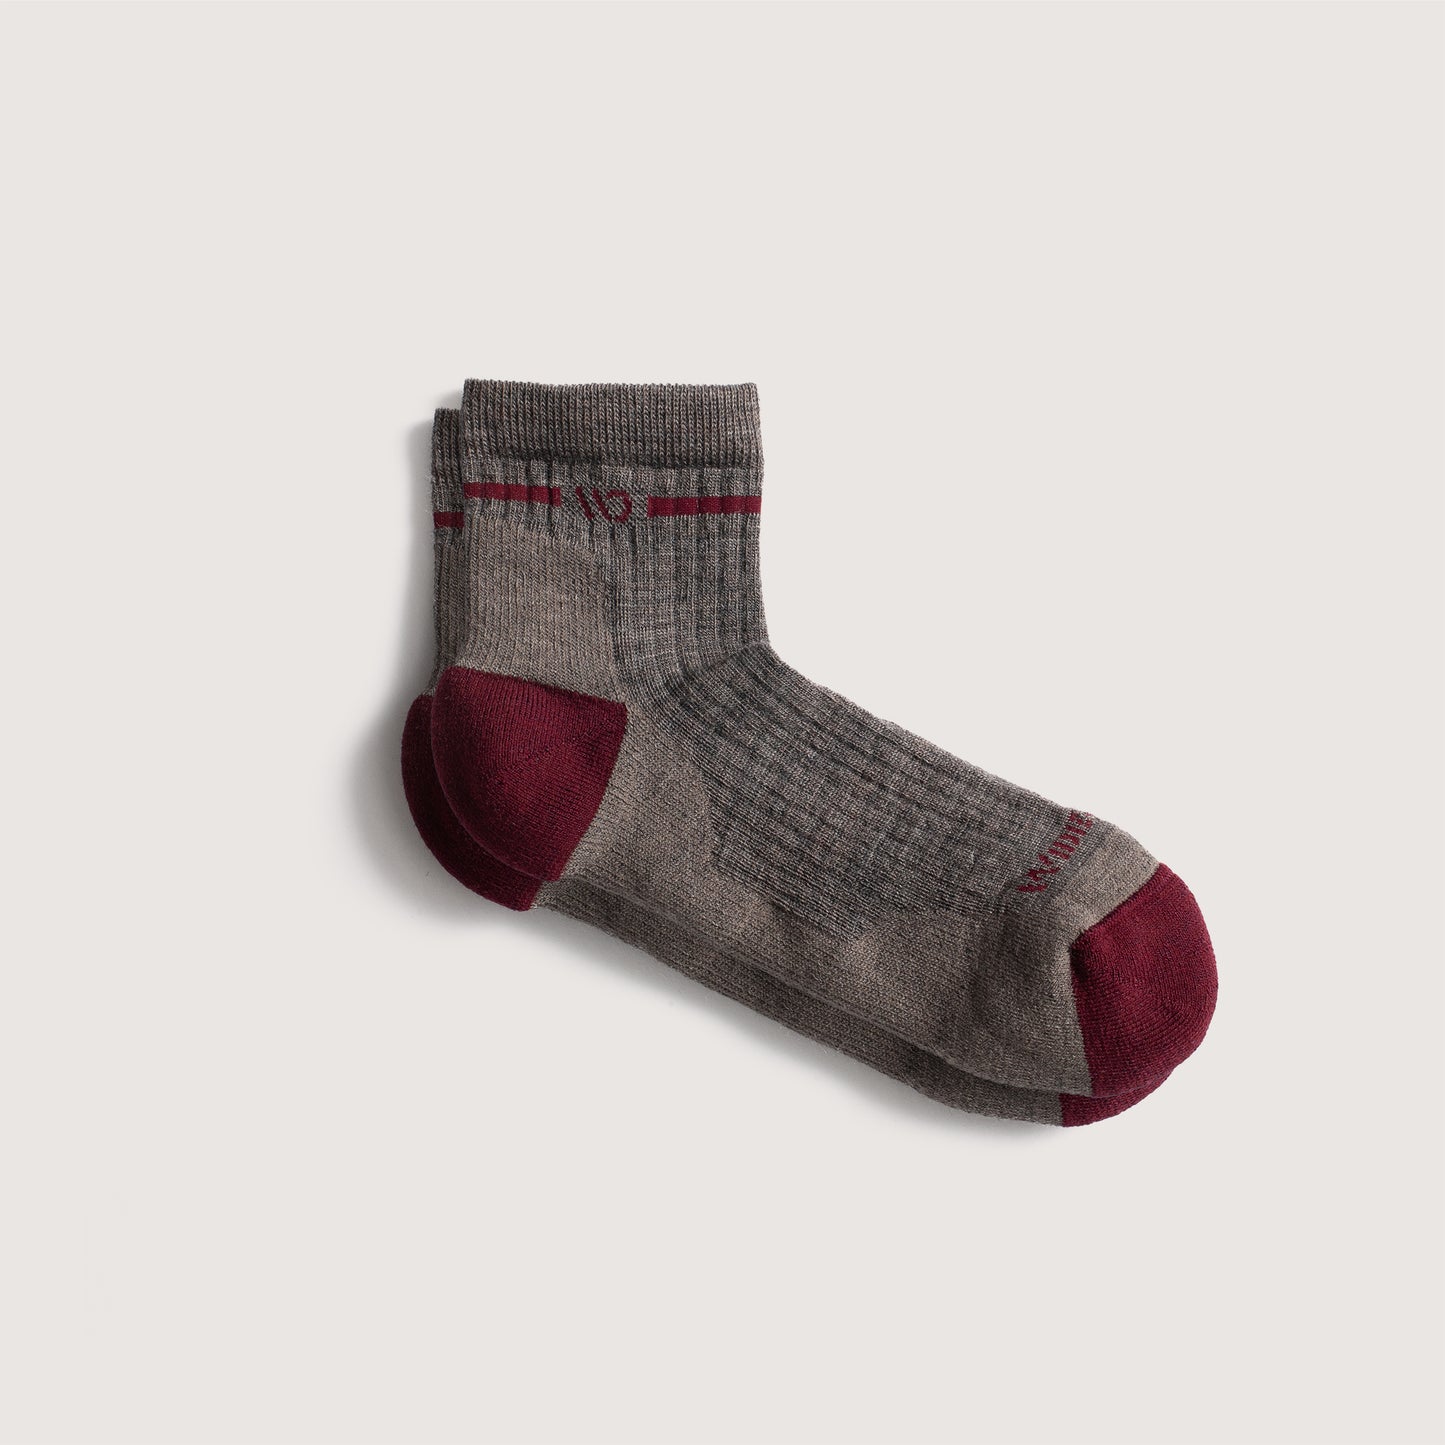 Flat socks with maroon heel/toe, taupe body, and Maroon logo and stripe under the cuff--Taupe